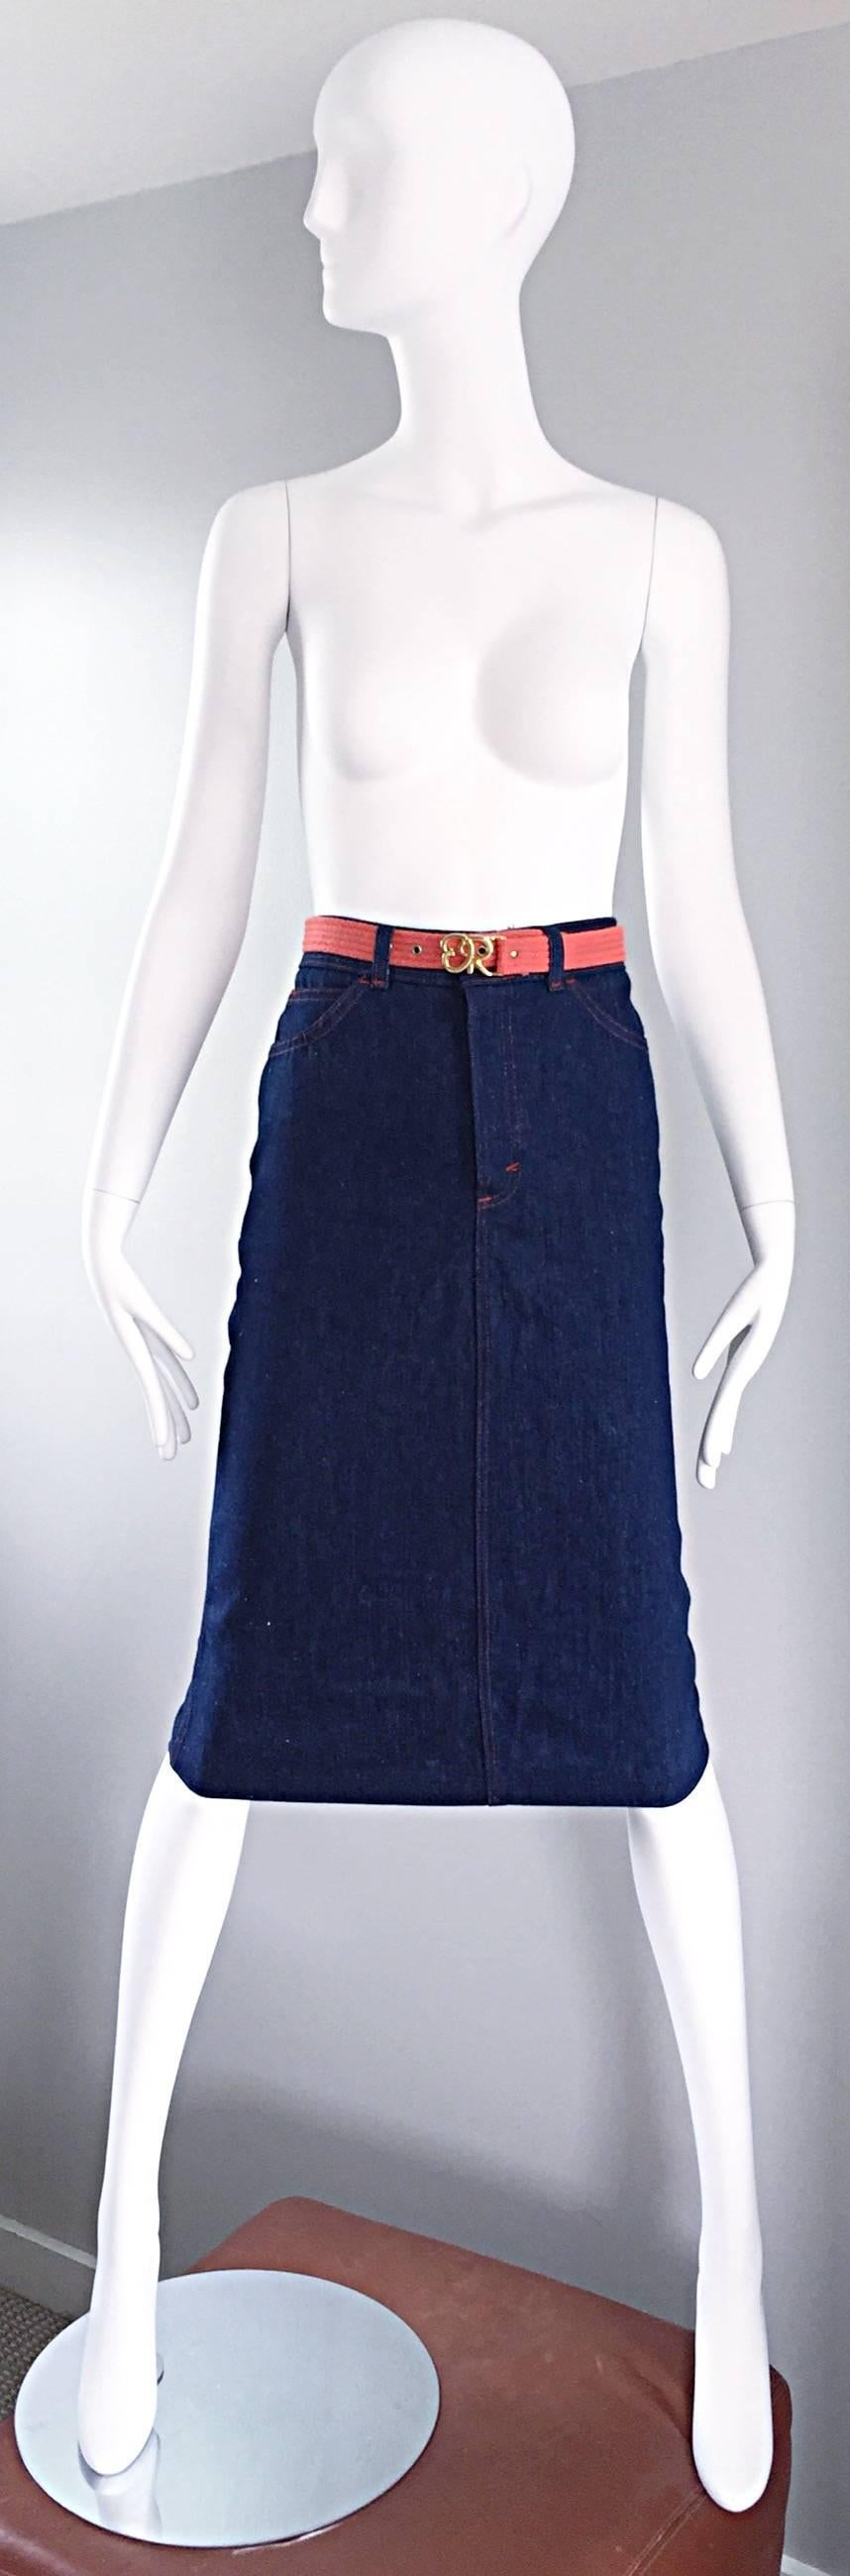 Chic vintage OSCAR DE LA RENTA high waisted indigo denim belted deadstock (still has tags attached) pencil skirt! Wonderful flattering fit, with a removable coral belt with gold logo buckle. Zipper fly with button closure. Two pockets at each side